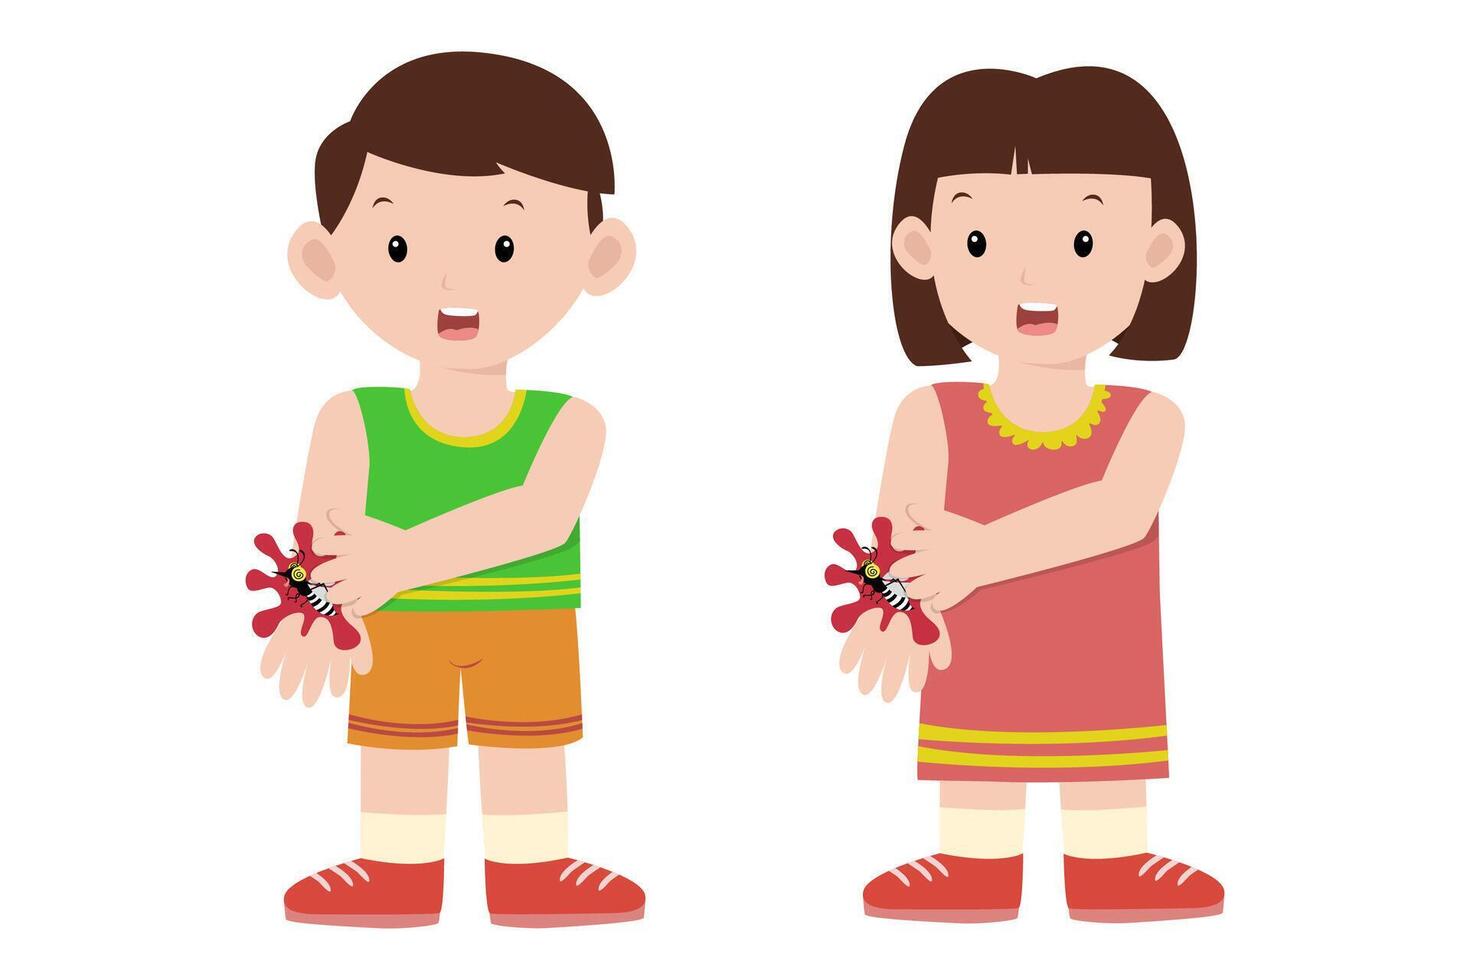 child hit mosquito on arm. dengue fever concept vector